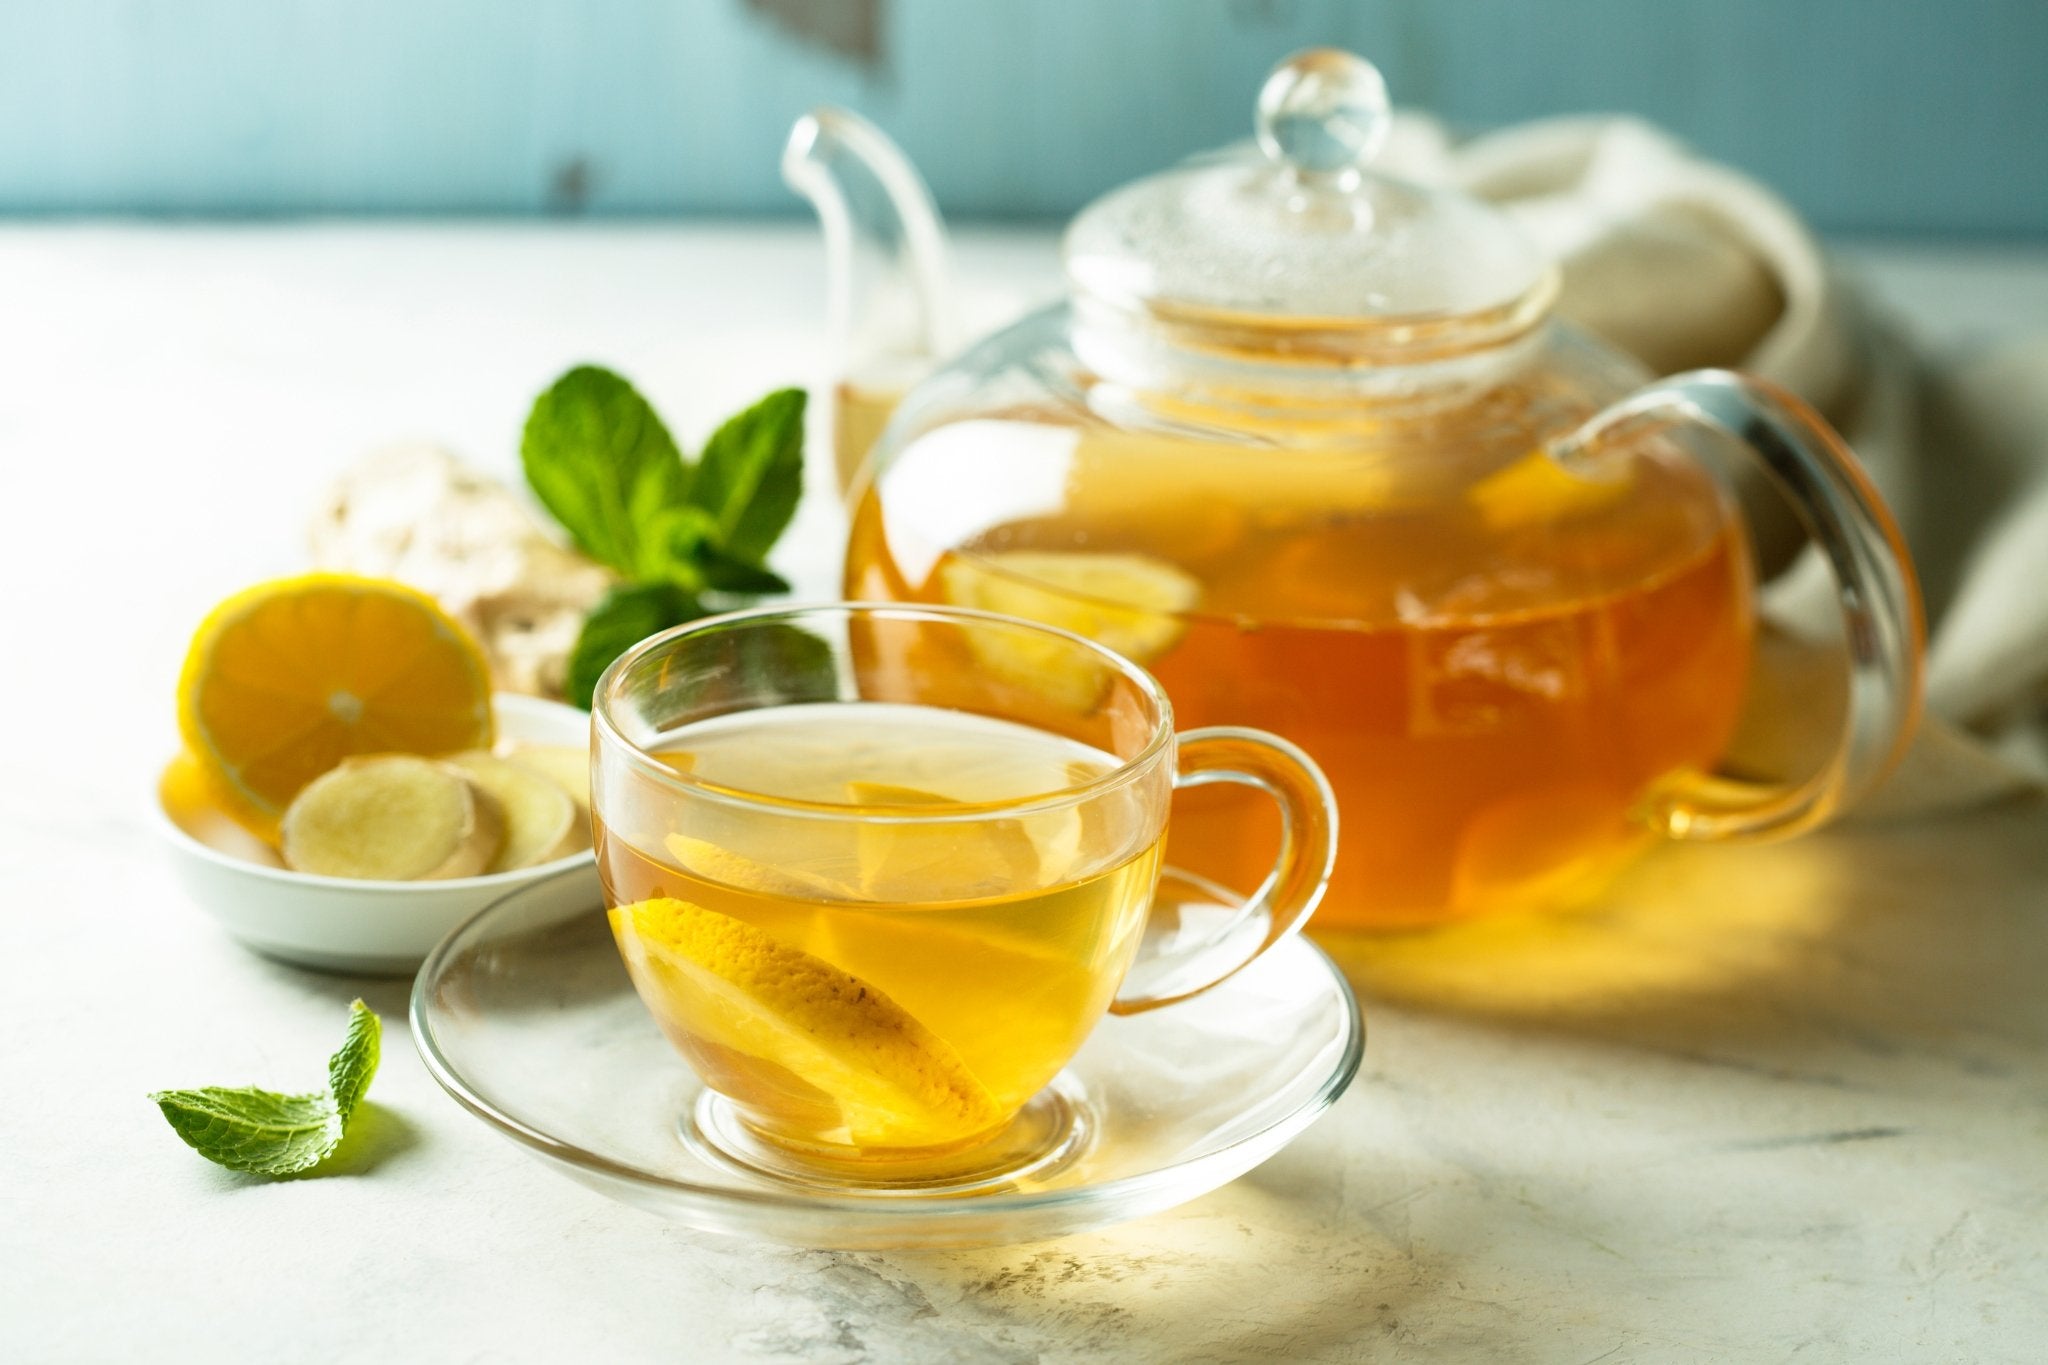 Is There A Tea For Weight Loss? Everything You Need To Know About Oolong Tea For Fat Loss. - Loose Leaf Tea Market